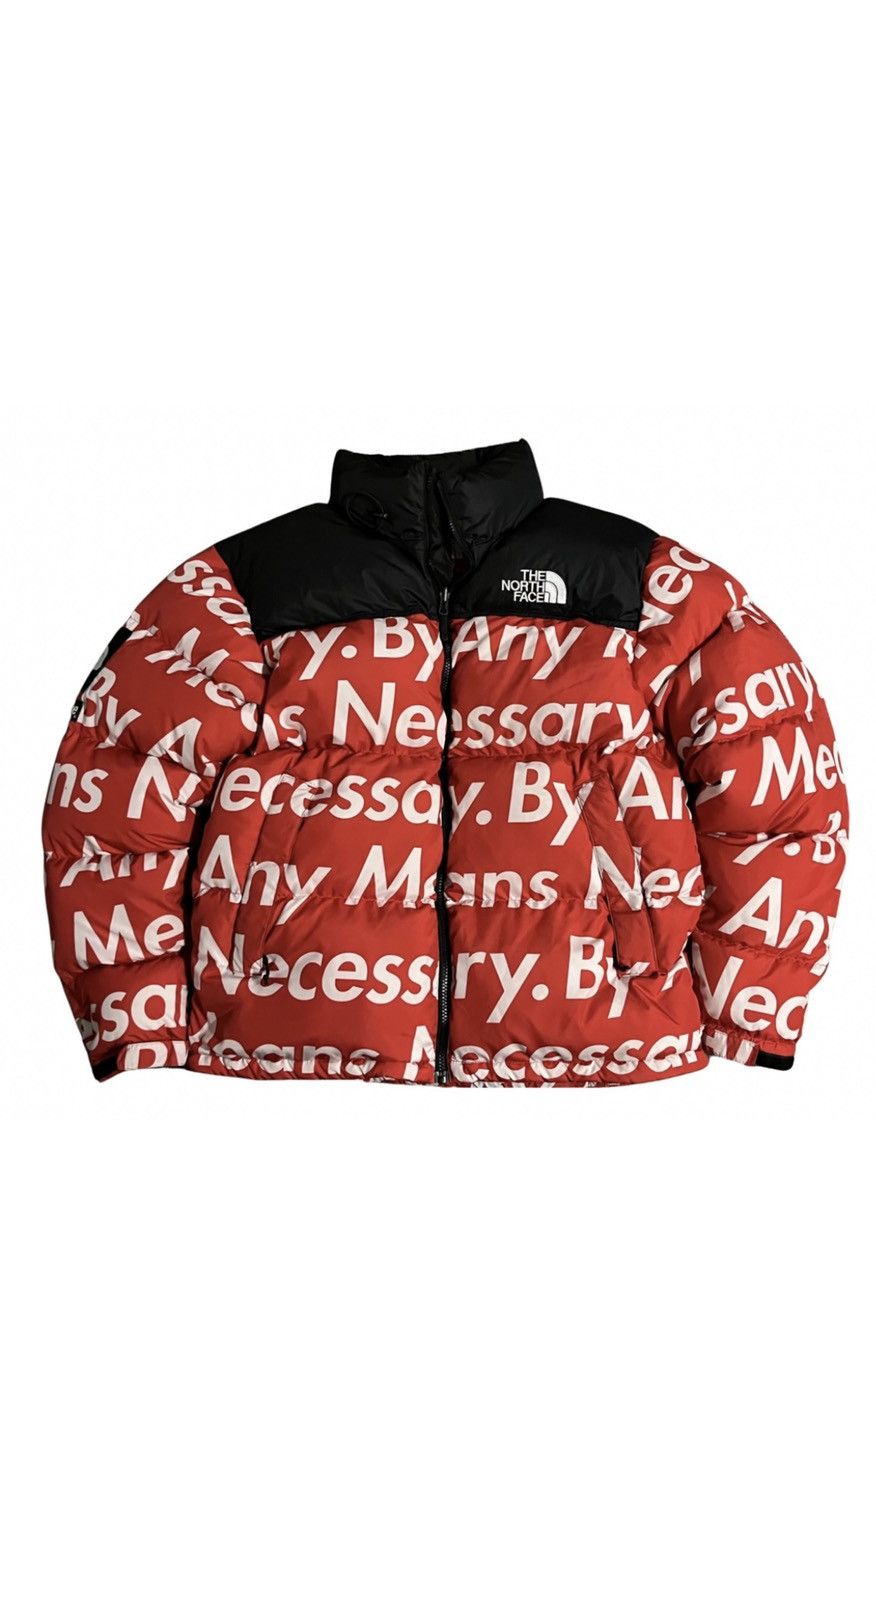 Supreme Supreme X Northface “By Any Means Necessary” print jacket Size US L / EU 52-54 / 3 - 1 Preview